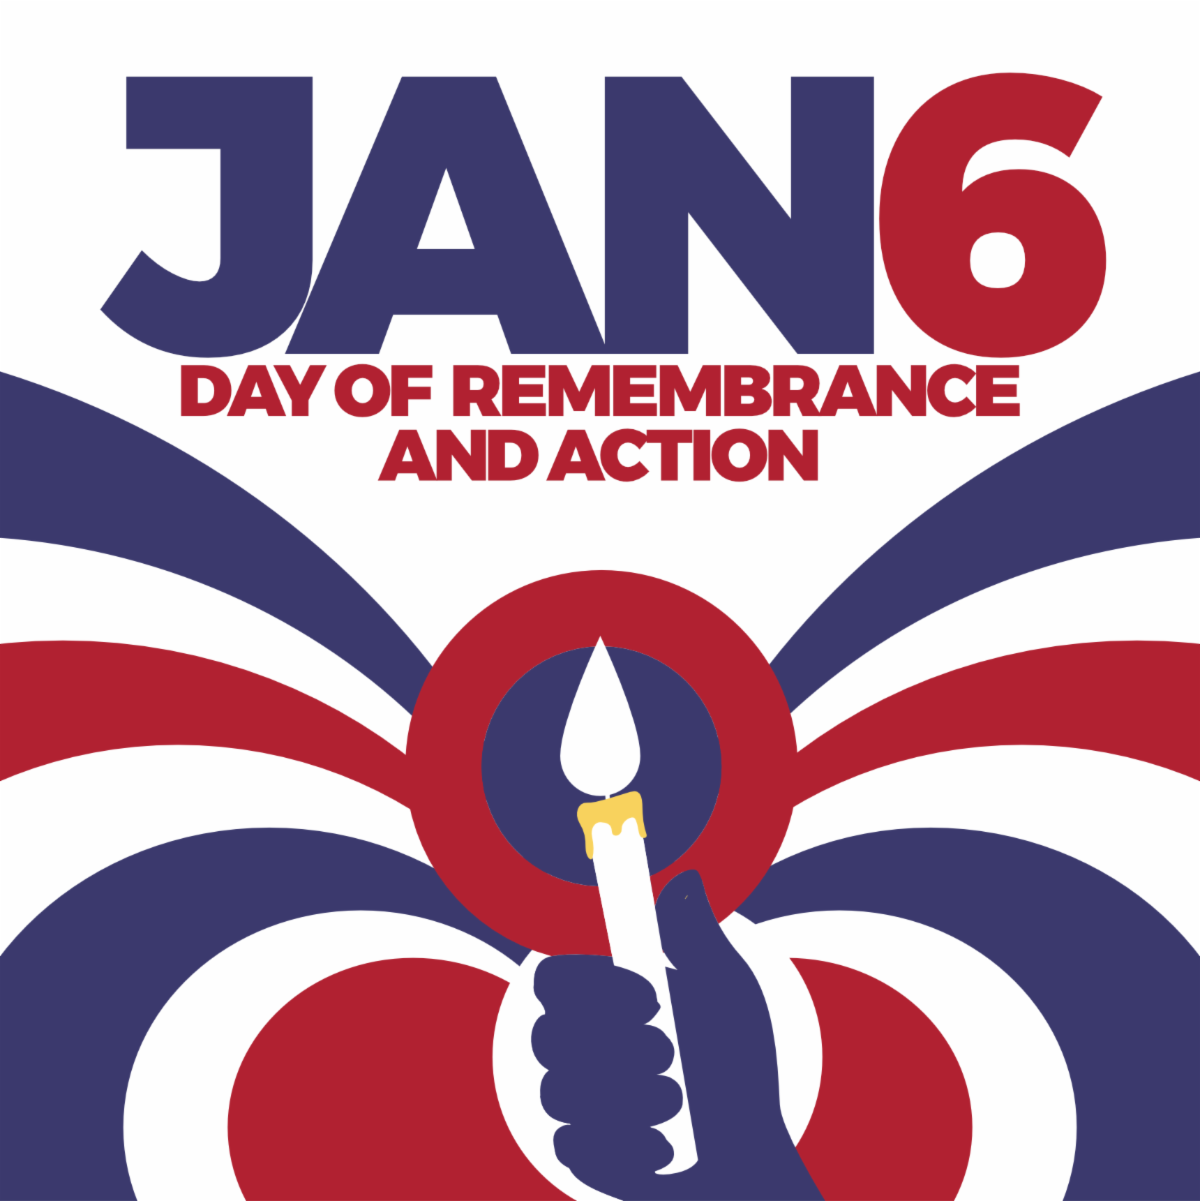 Jan 6 Day of Remembrance and Action